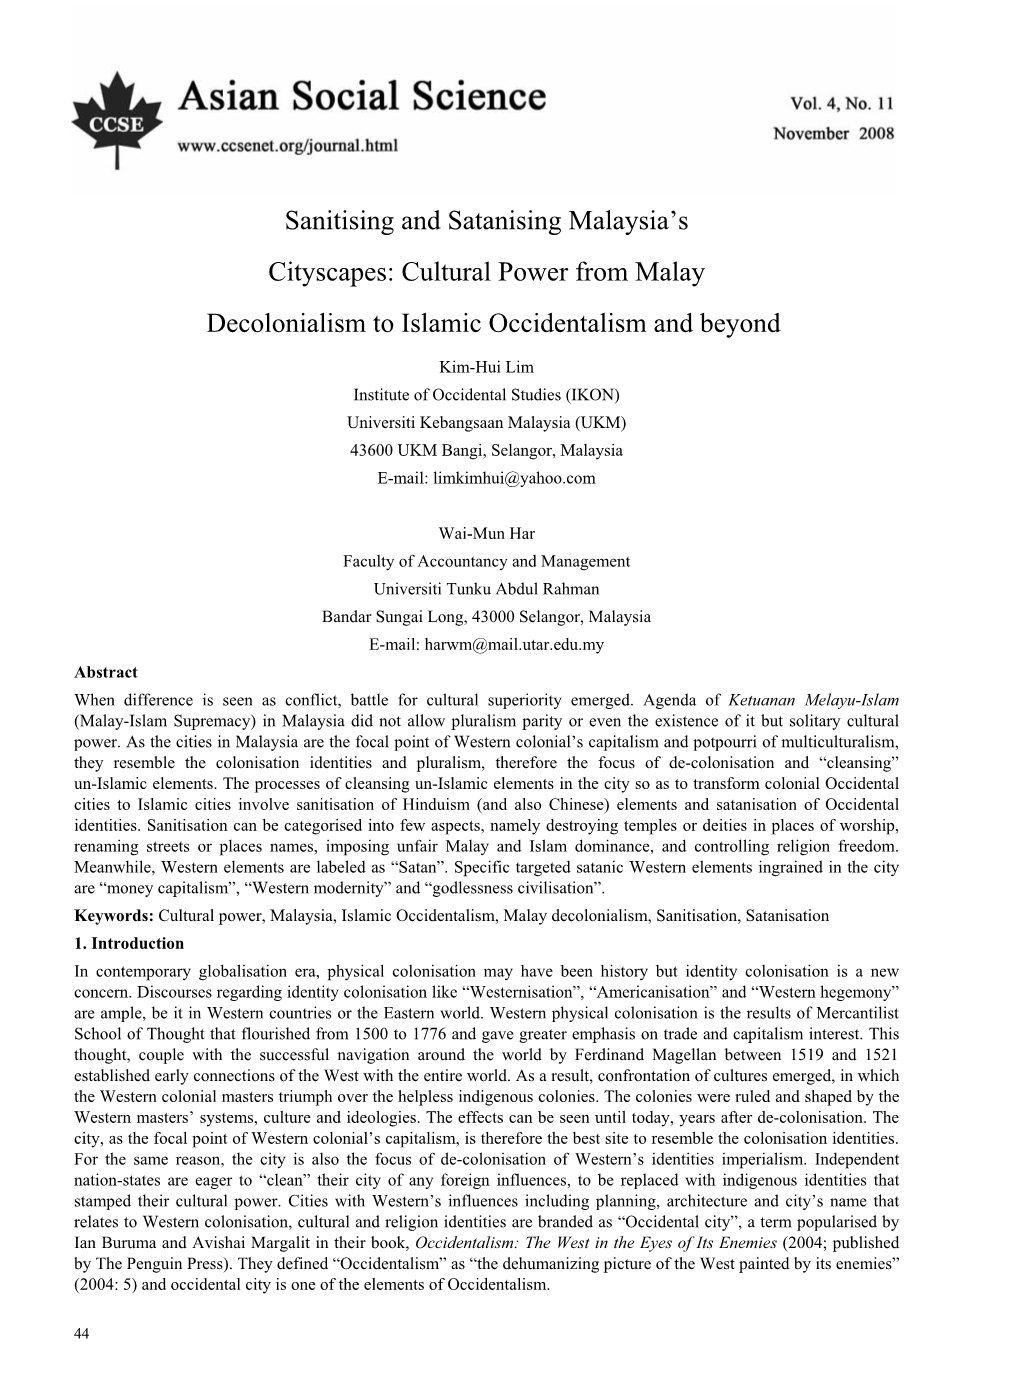 Cultural Power from Malay Decolonialism to Islamic Occidentalism and Beyond